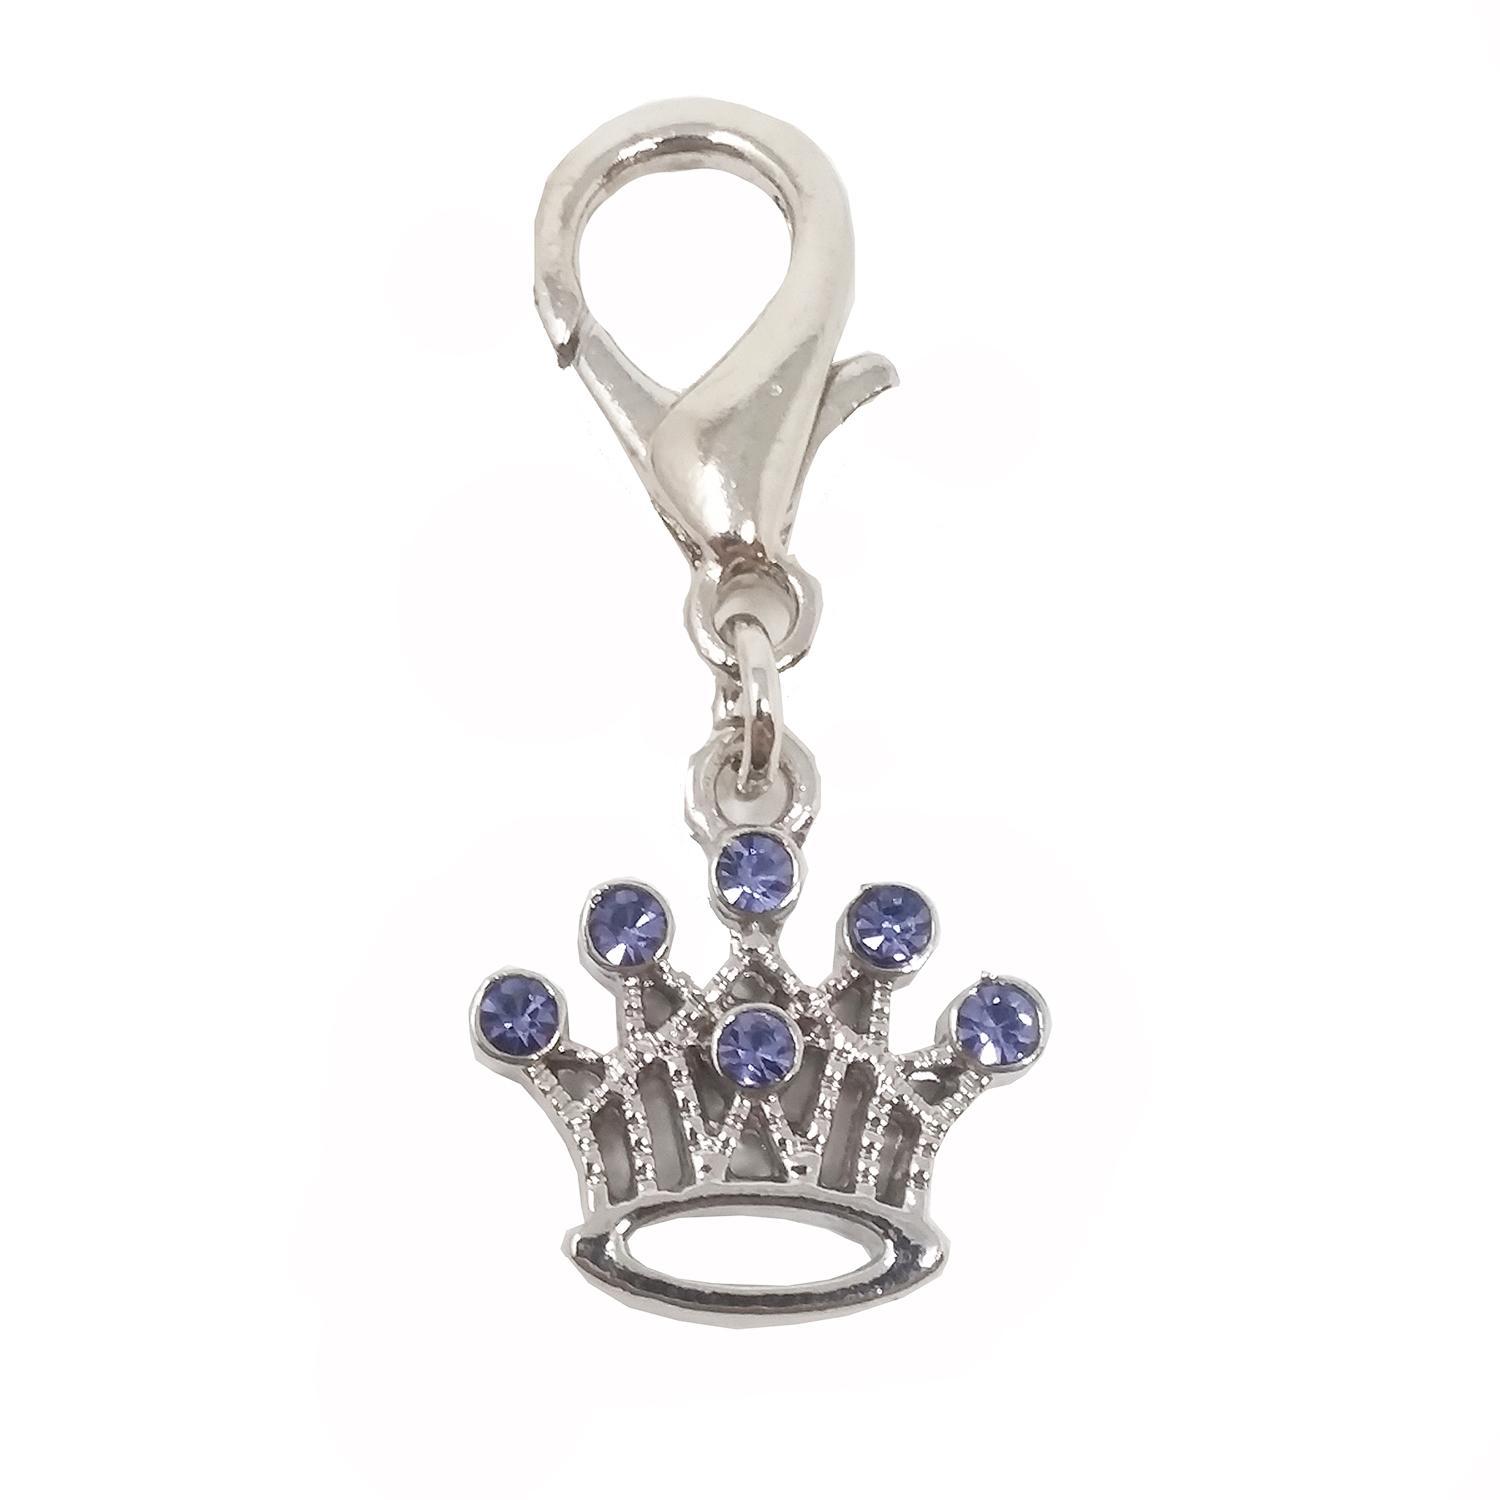 Crown D-Ring Pet Collar Charm by FouFou Dog - Lilac